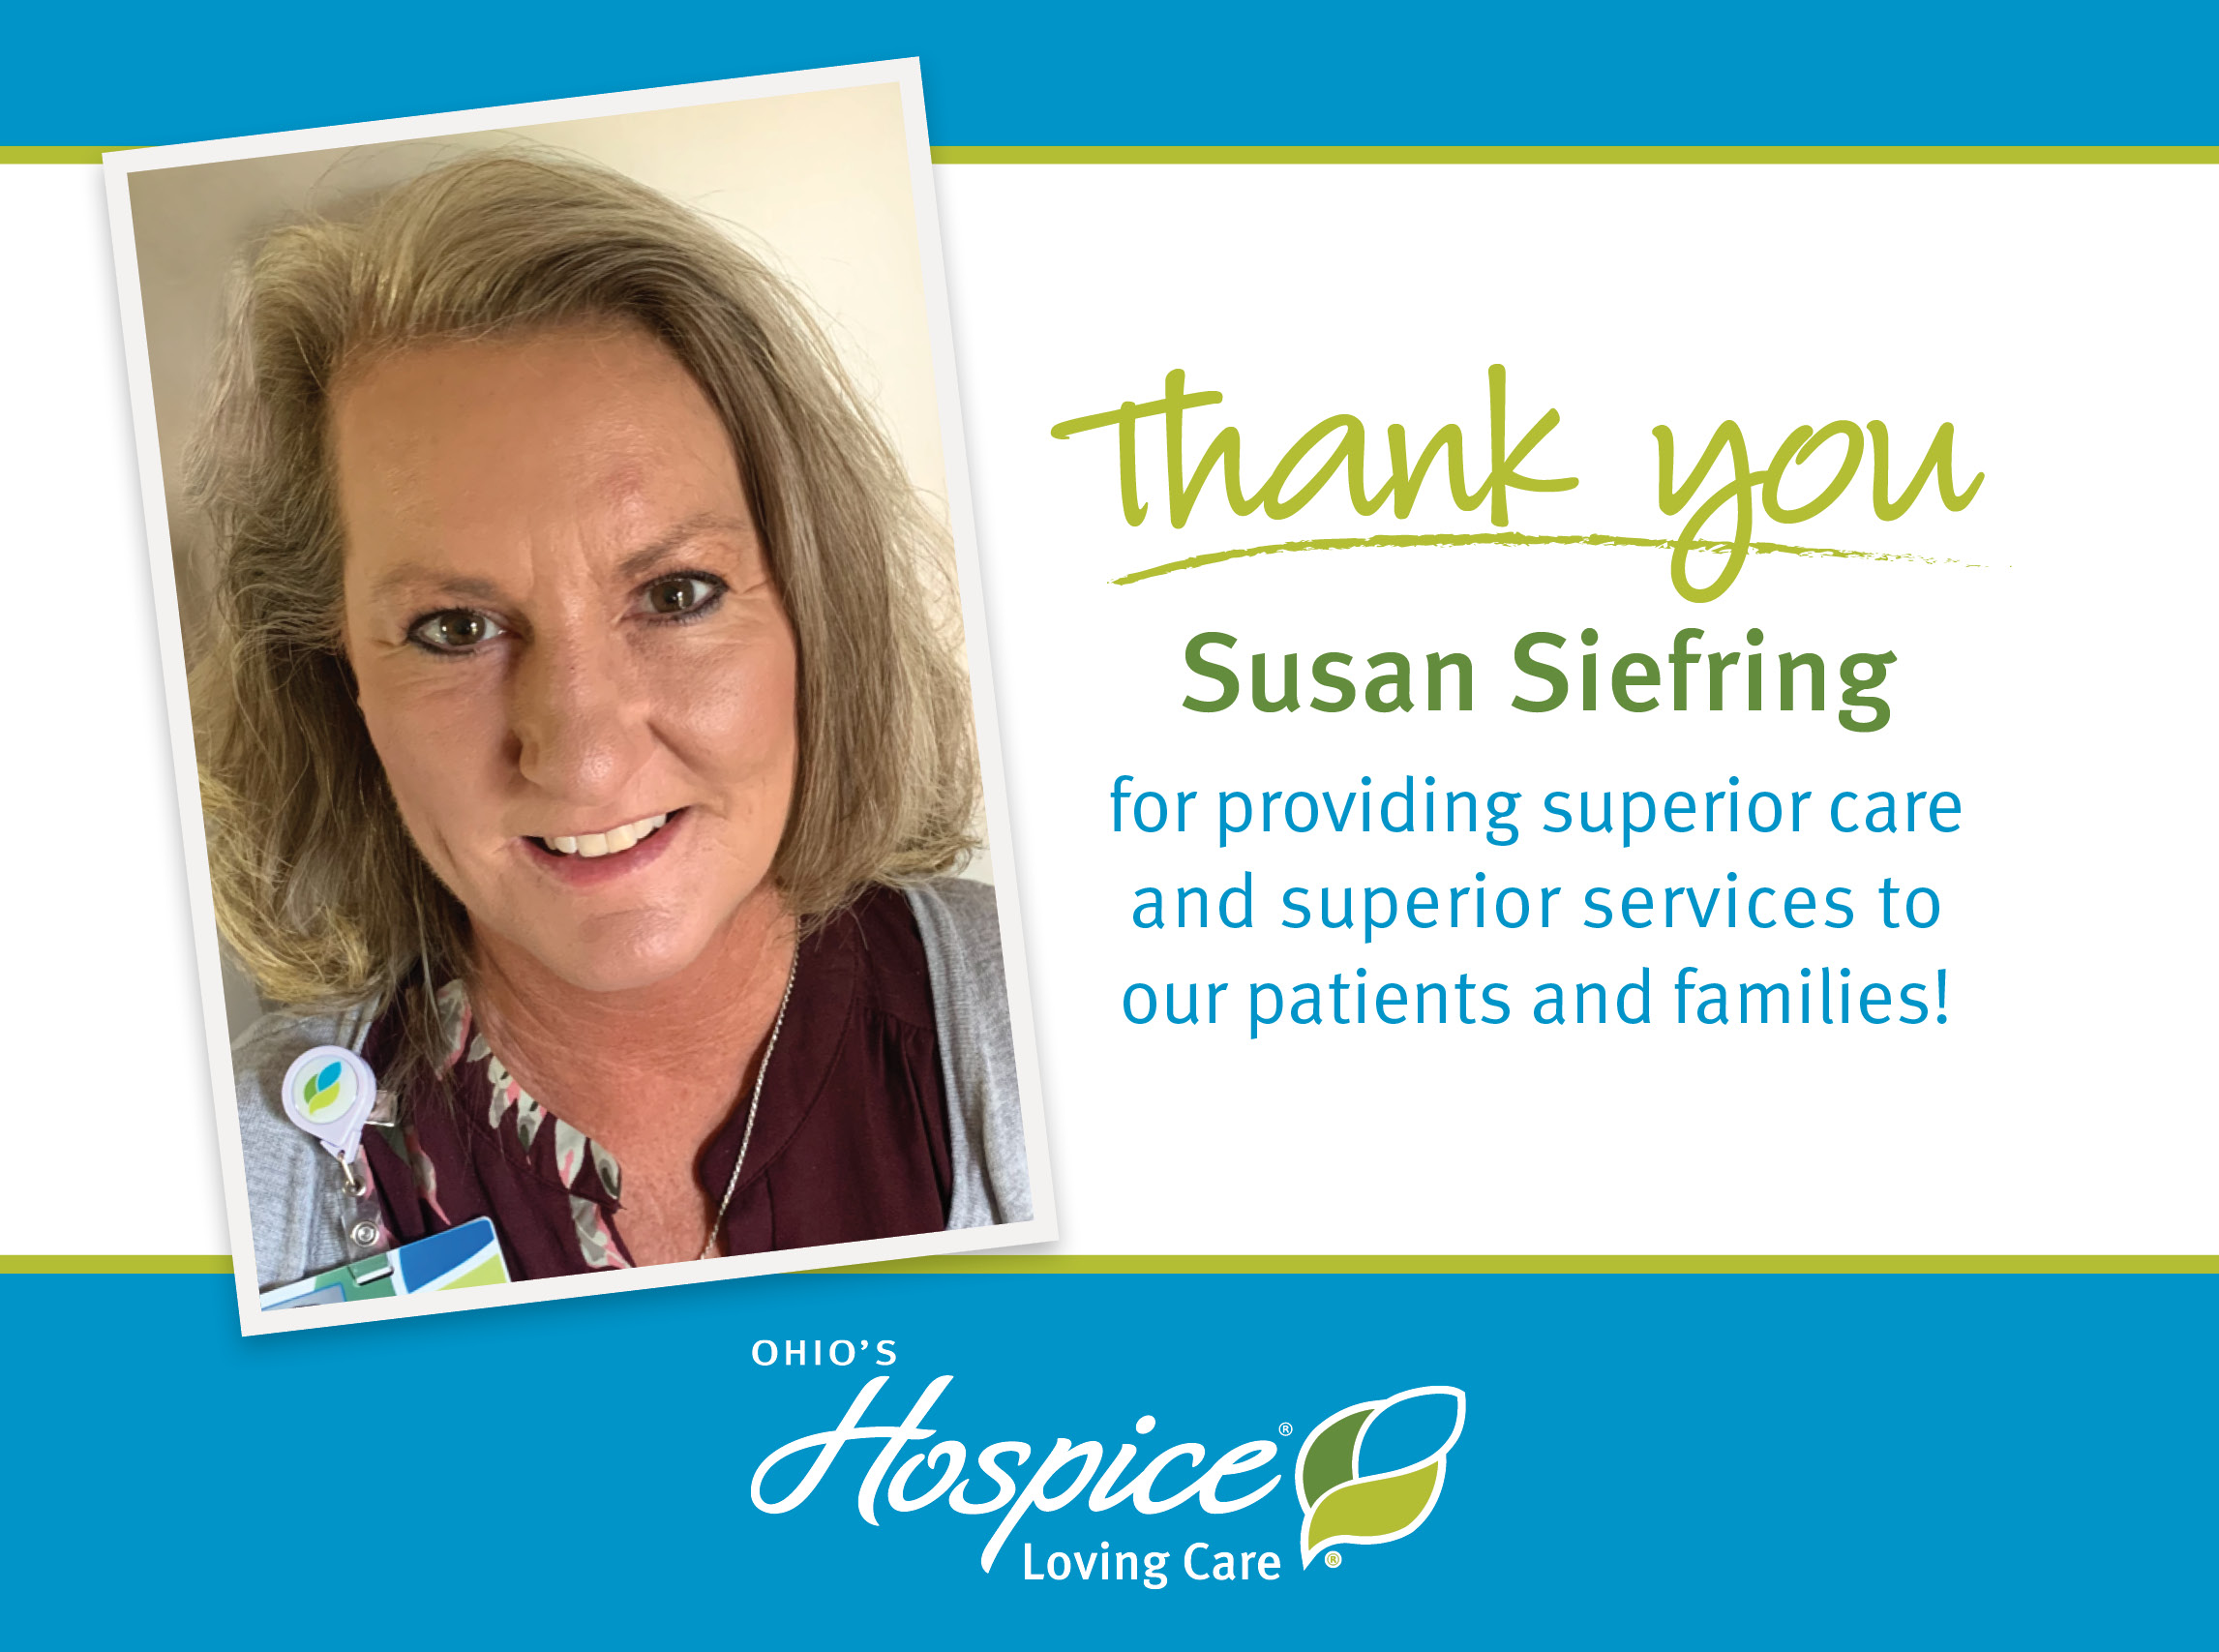 Susan Siefring Makes a Difference